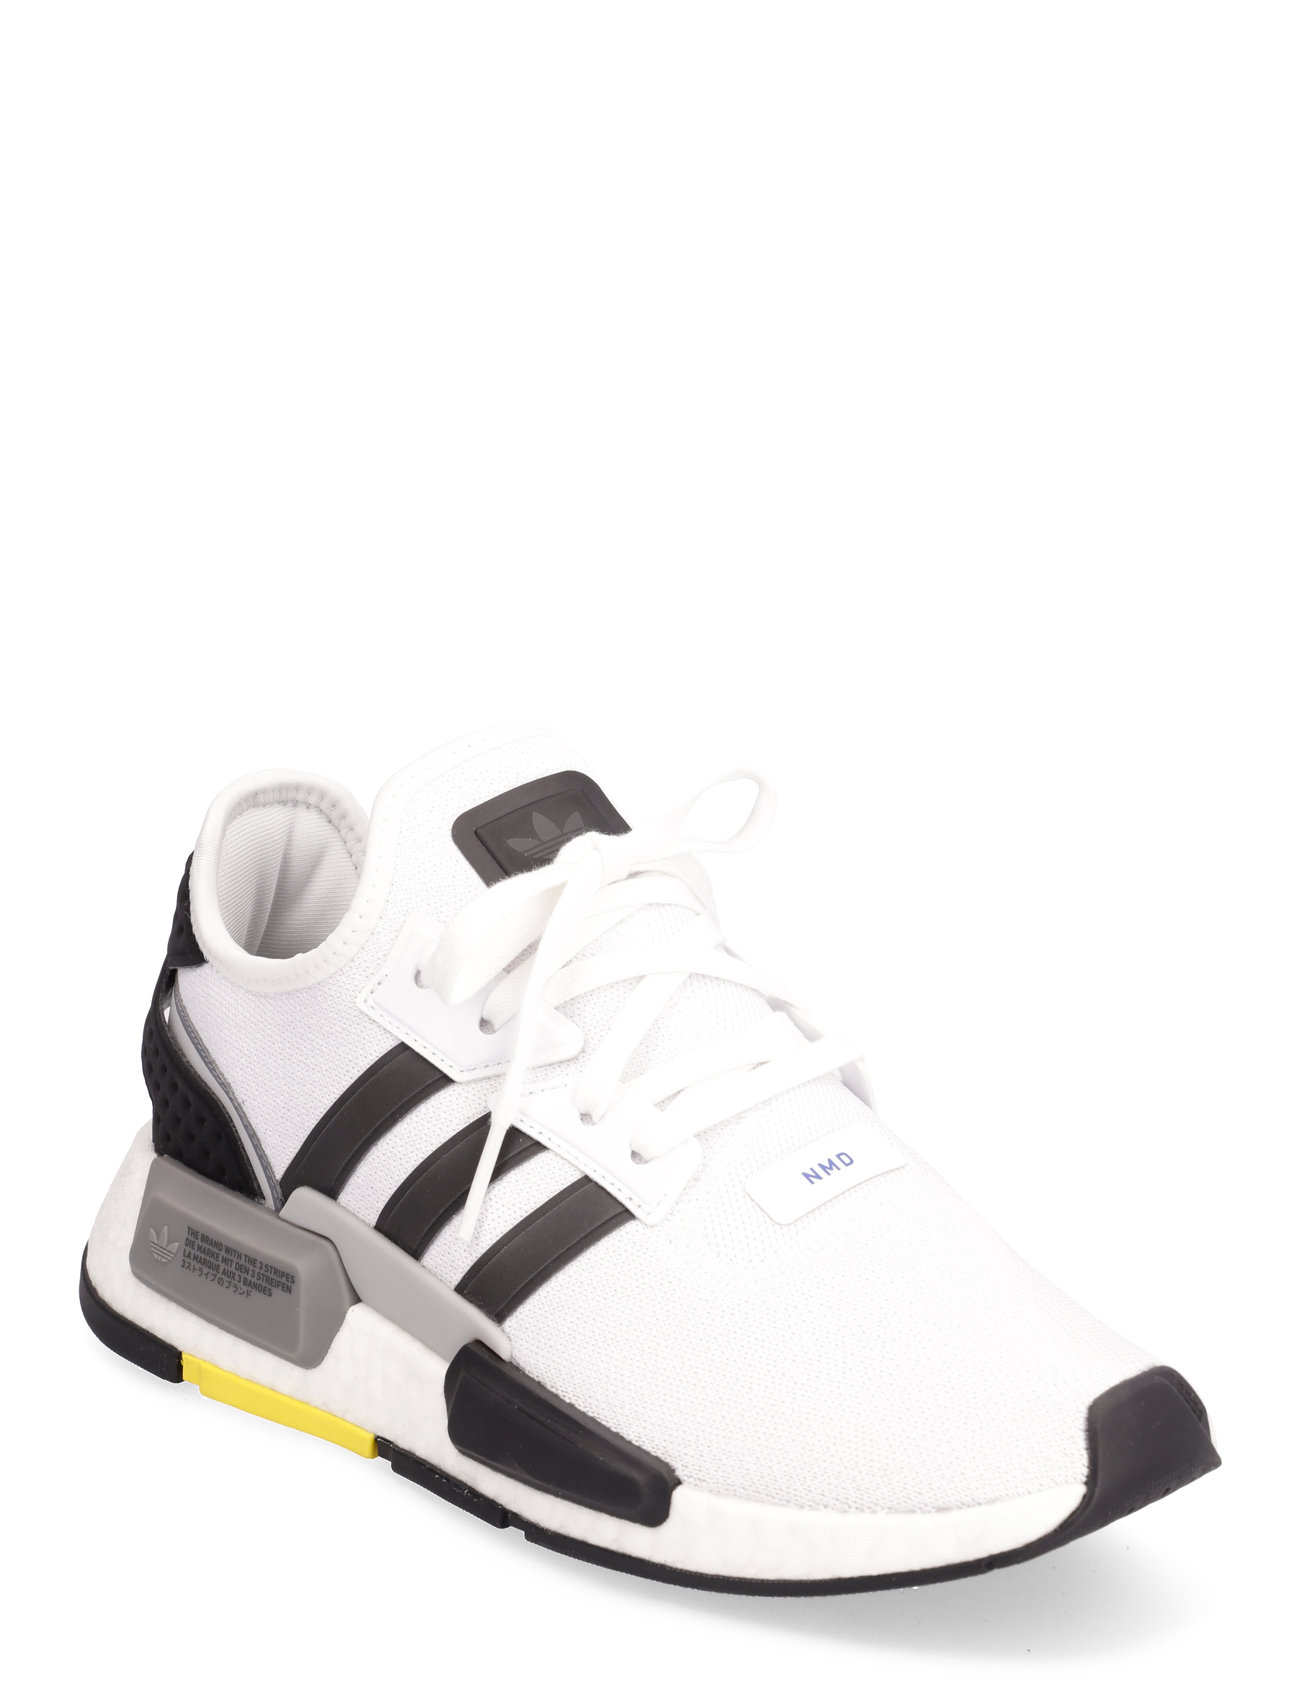 Nmd_G1 Shoes Sport Sneakers Low-top Sneakers White Adidas Originals